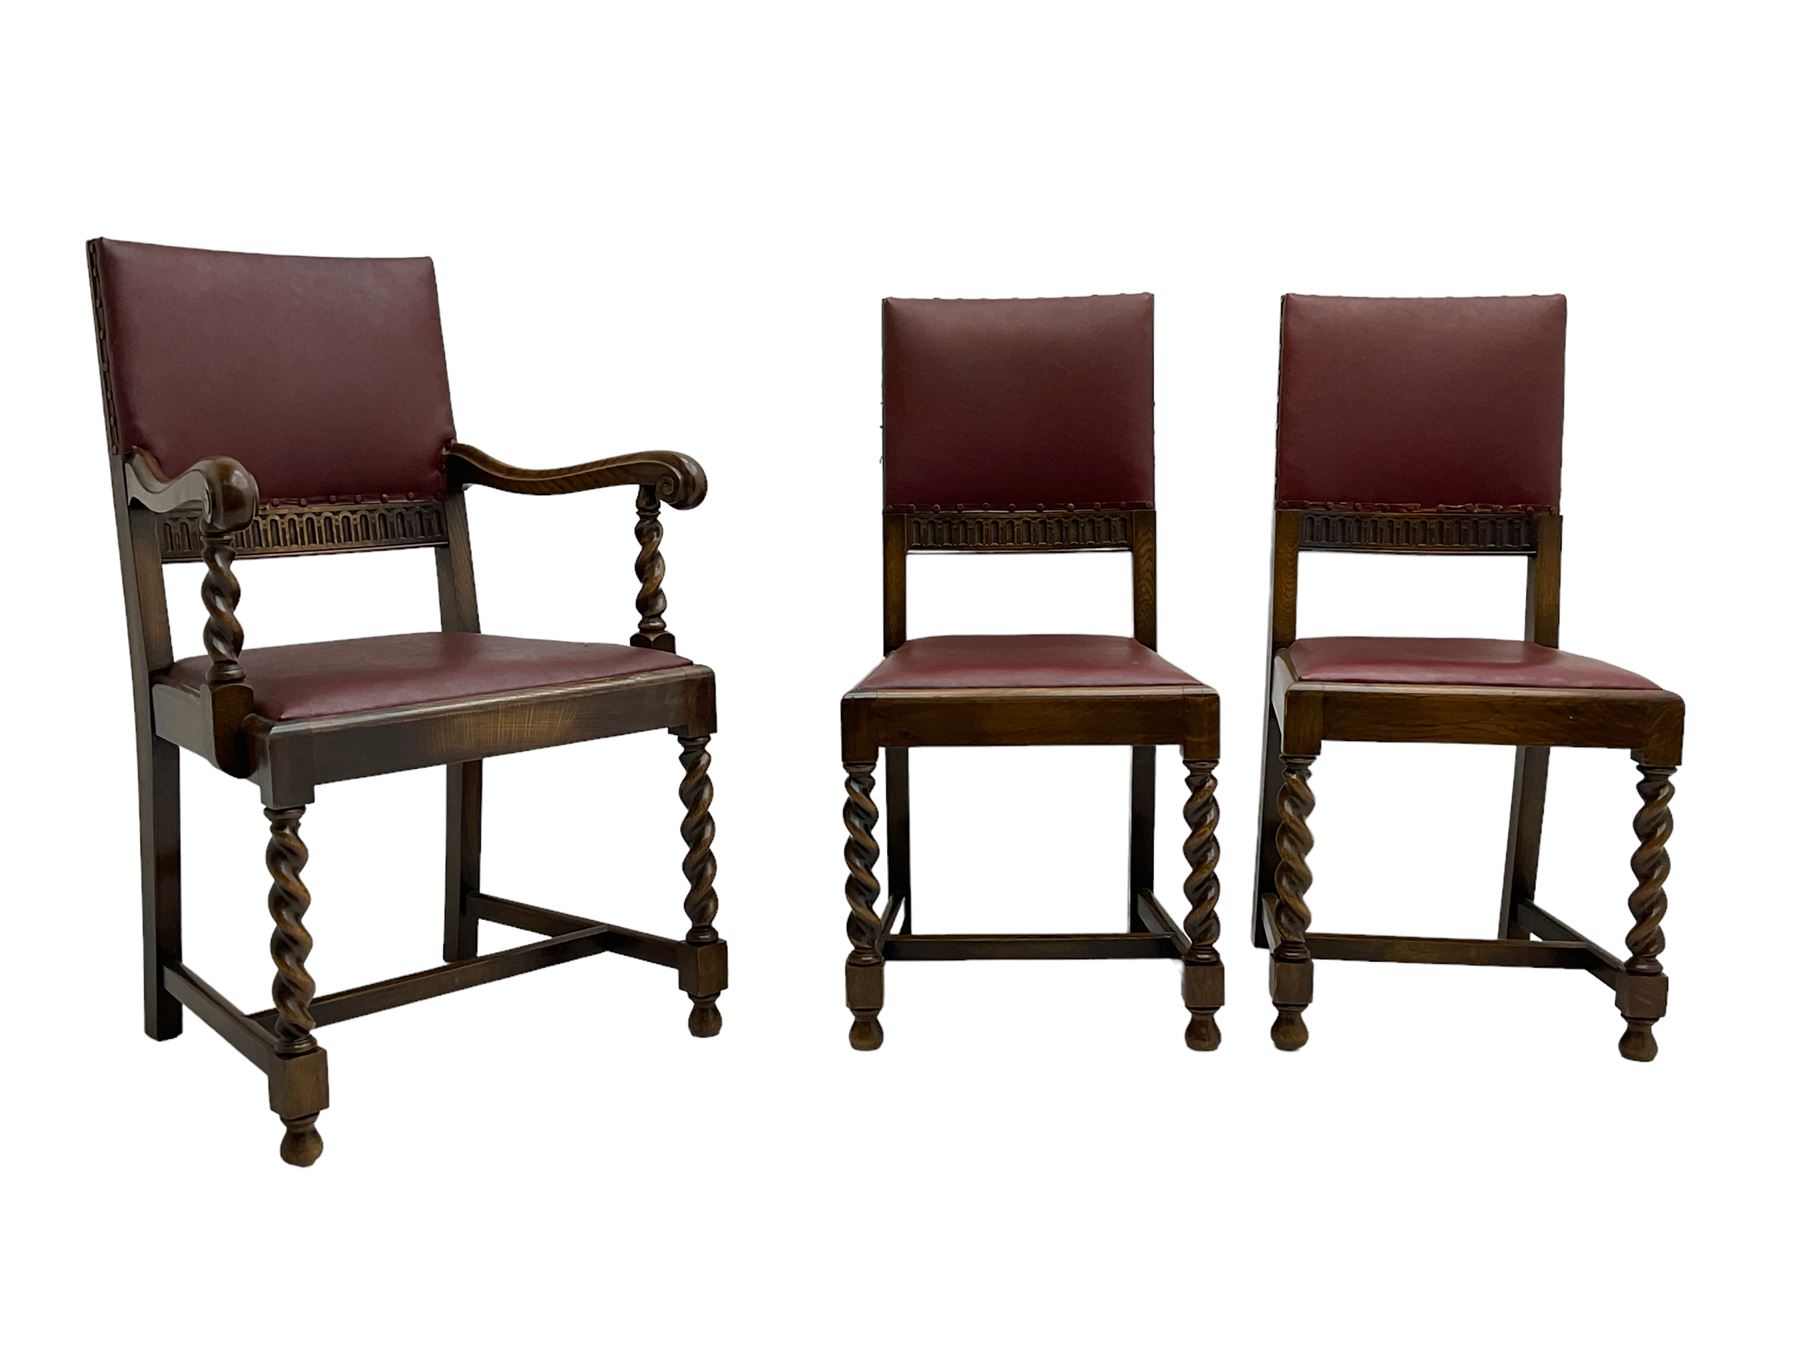 Mid-20th century set seven (6+1) oak barley twist dining chairs - Image 4 of 7